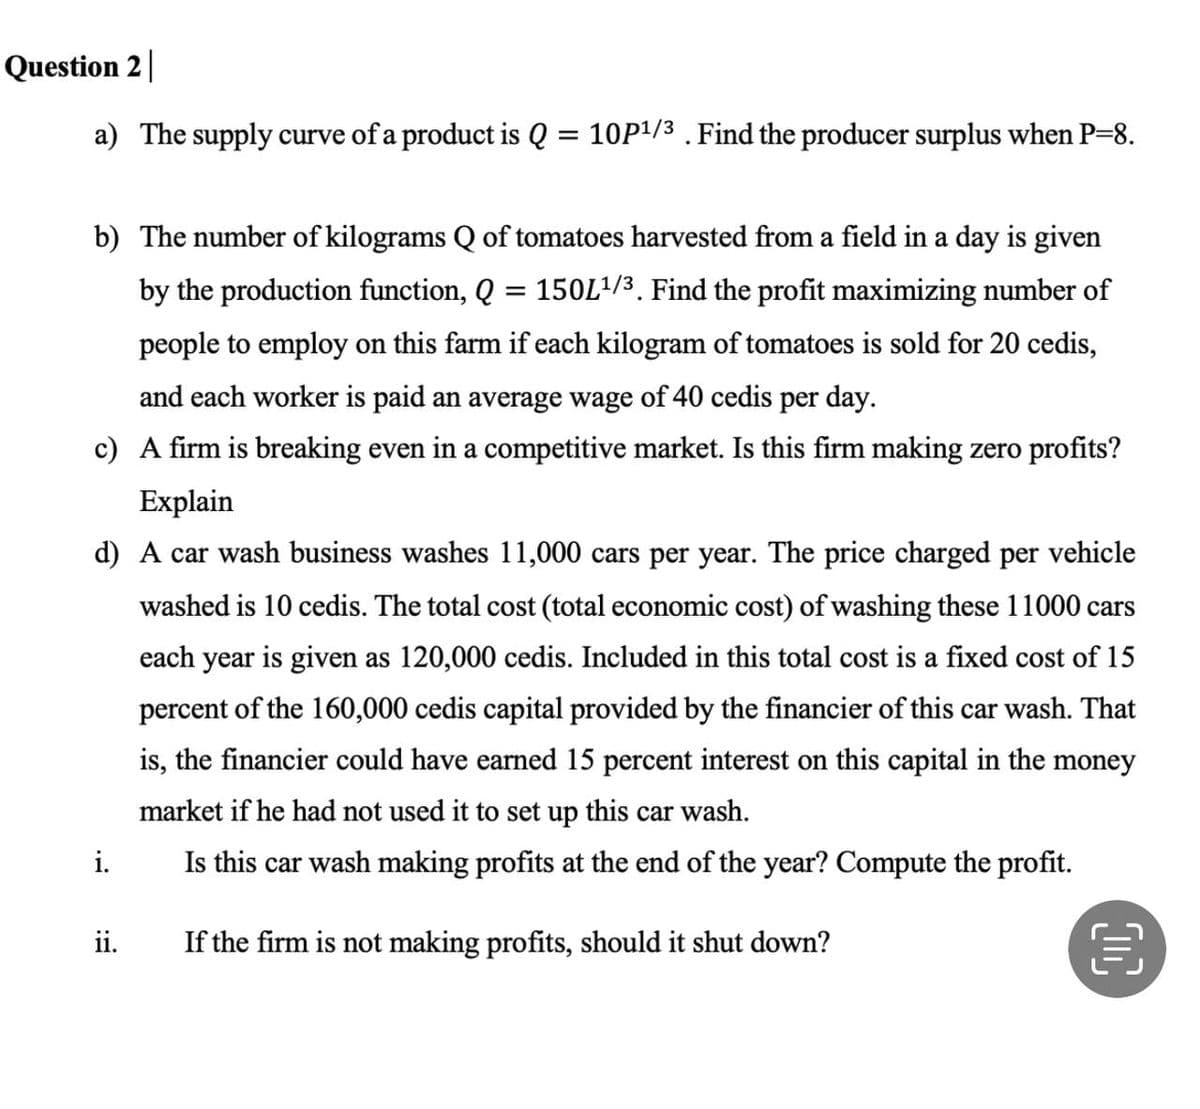 Question 2
a) The supply curve of a product is Q
=
b) The number of kilograms Q of tomatoes harvested from a field in a day is given
by the production function, Q = 150L¹/³. Find the profit maximizing number of
people to employ on this farm if each kilogram of tomatoes is sold for 20 cedis,
and each worker is paid an average wage of 40 cedis per day.
c) A firm is breaking even in a competitive market. Is this firm making zero profits?
Explain
d) A car wash business washes 11,000 cars per year. The price charged per vehicle
washed is 10 cedis. The total cost (total economic cost) of washing these 11000 cars
each year is given as 120,000 cedis. Included in this total cost is a fixed cost of 15
percent of the 160,000 cedis capital provided by the financier of this car wash. That
is, the financier could have earned 15 percent interest on this capital in the money
market if he had not used it to set up this car wash.
Is this car wash making profits at the end of the year? Compute the profit.
If the firm is not making profits, should it shut down?
i.
10P¹/3. Find the producer surplus when P=8.
ii.
€